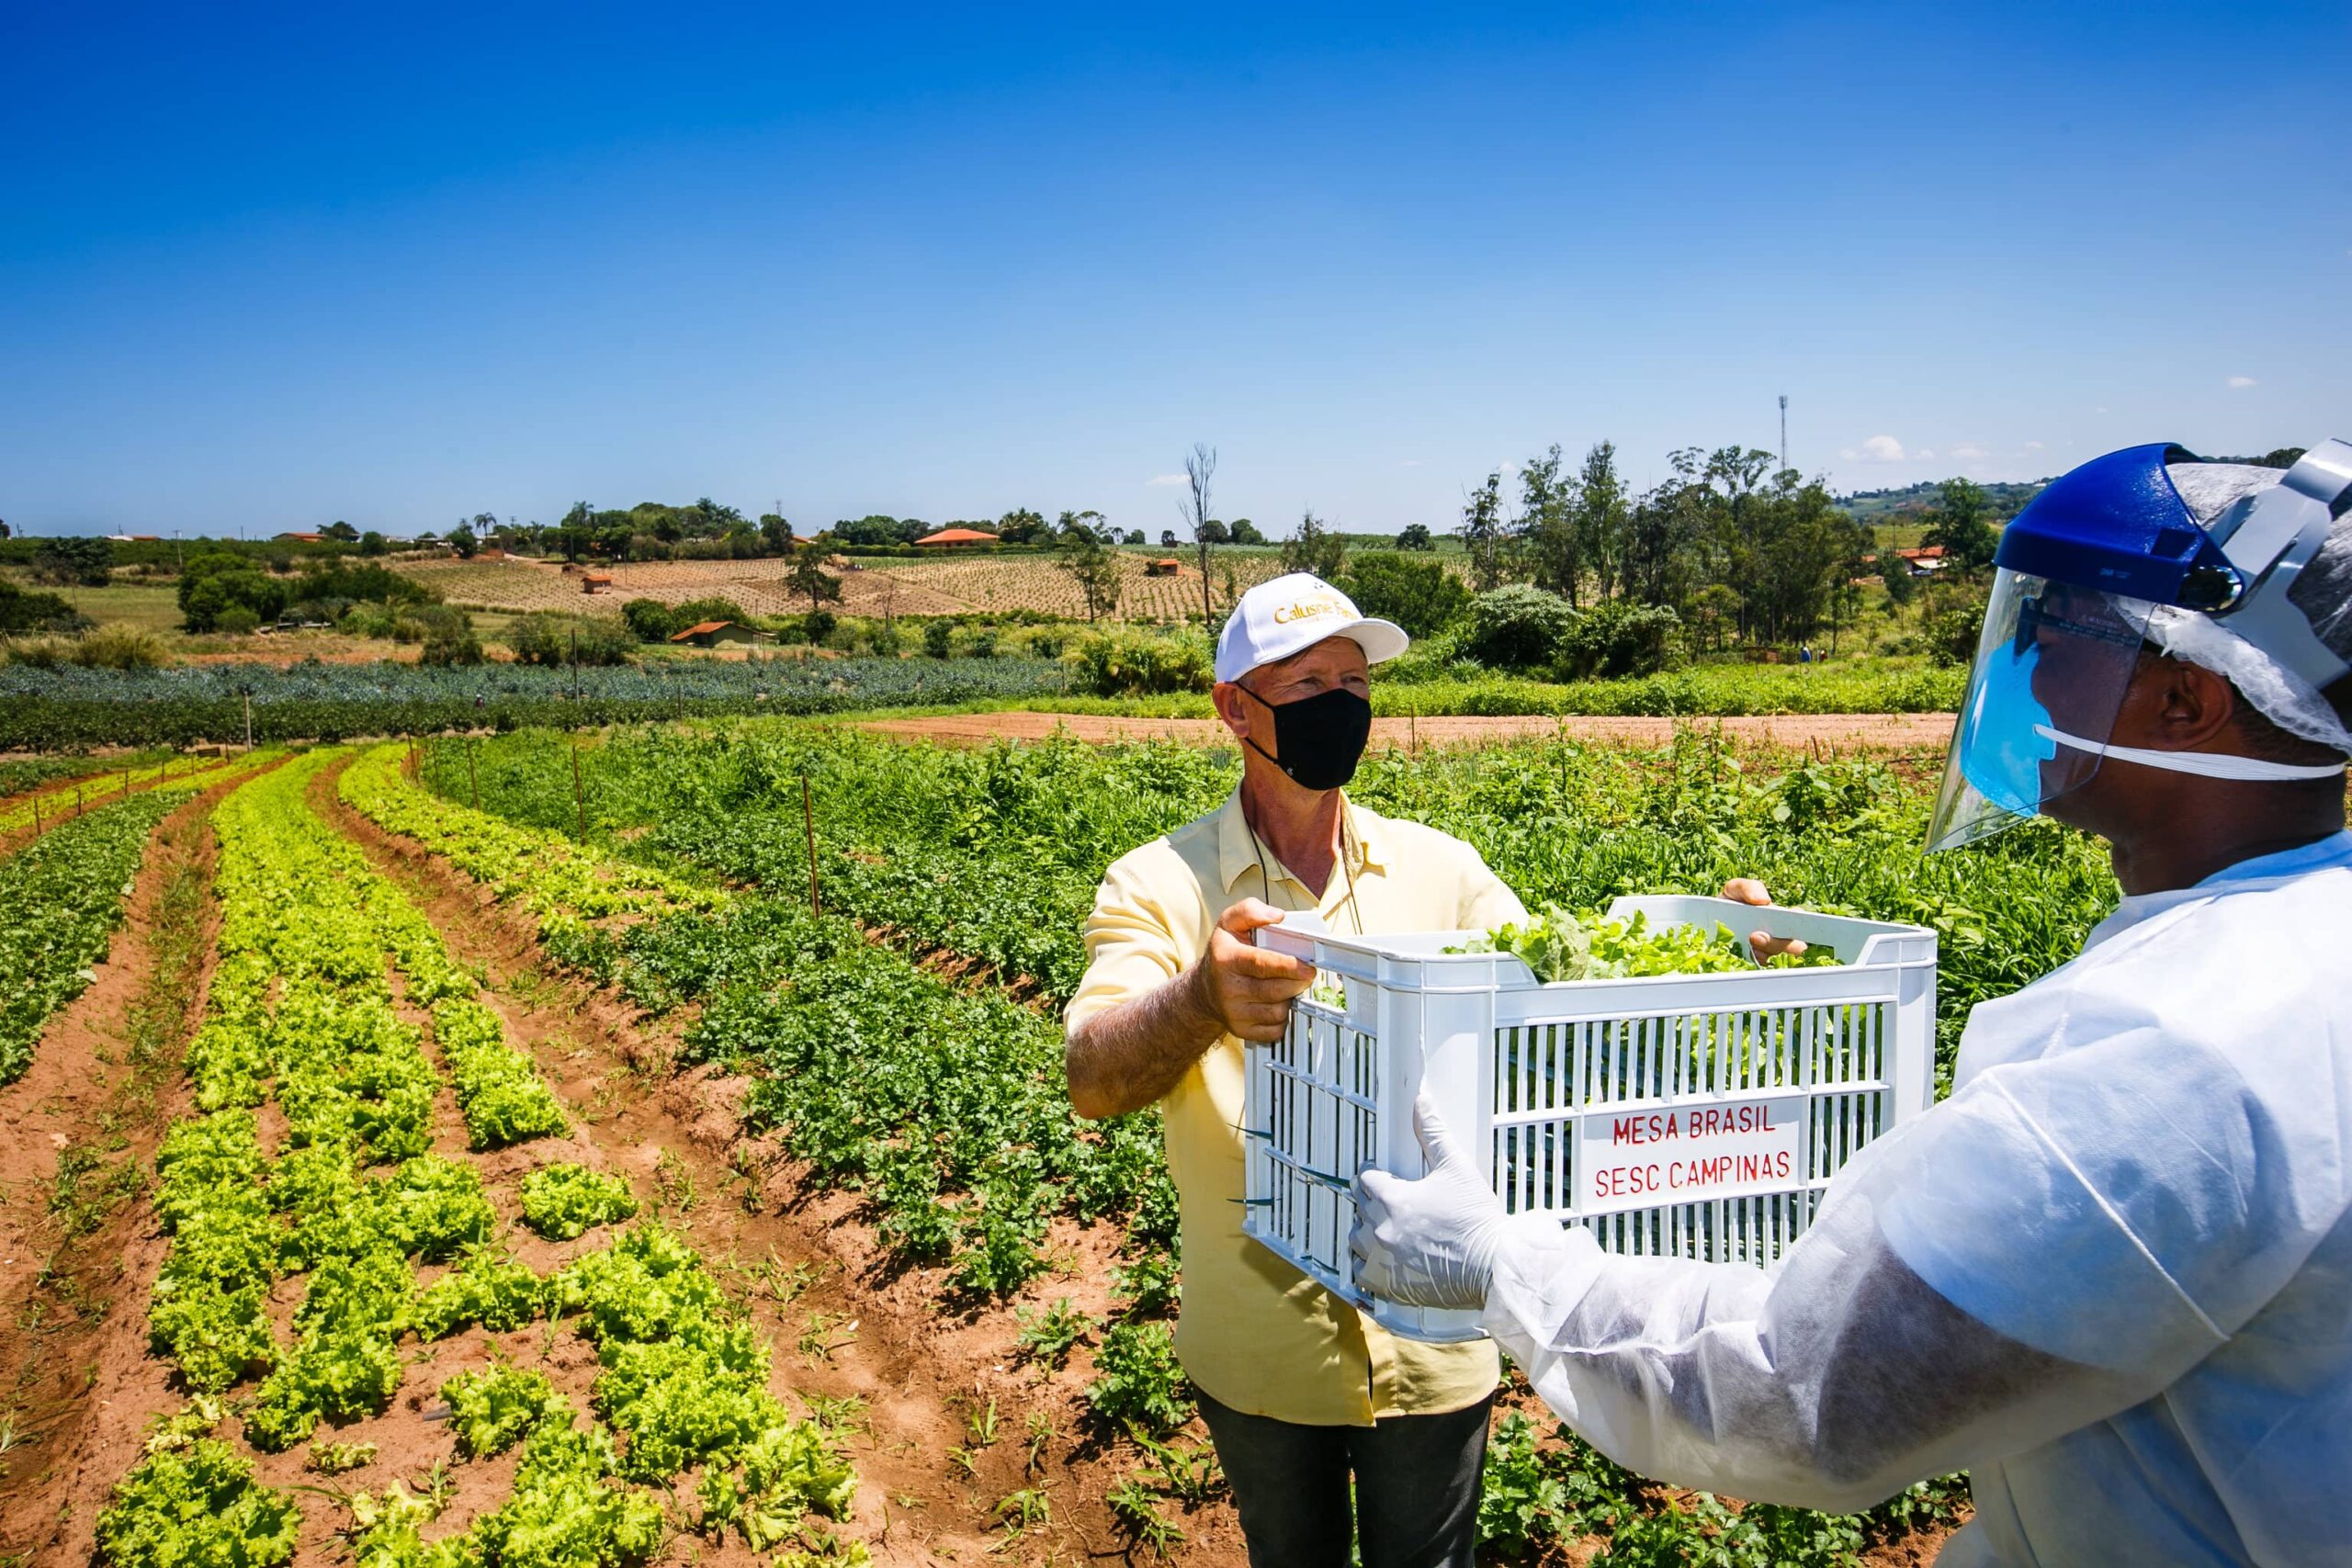 A food bank staff member helps a farm owner carry a crate of donated produce.